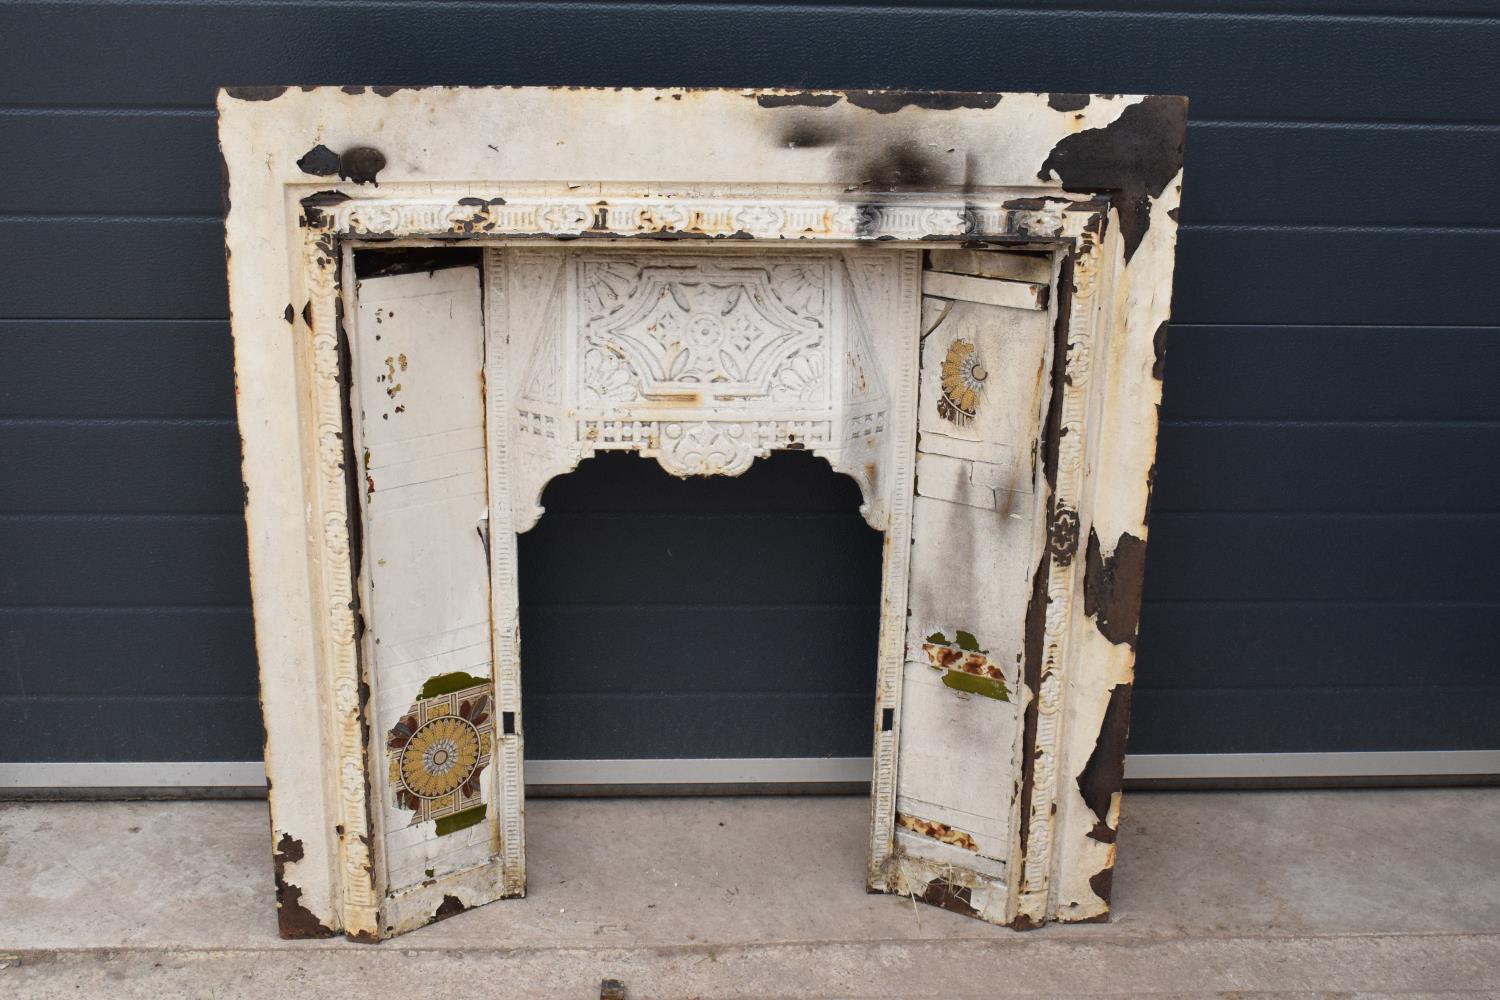 Victorian cast iron fireplace set with tiles. 96 x 14 x 97cm tall.